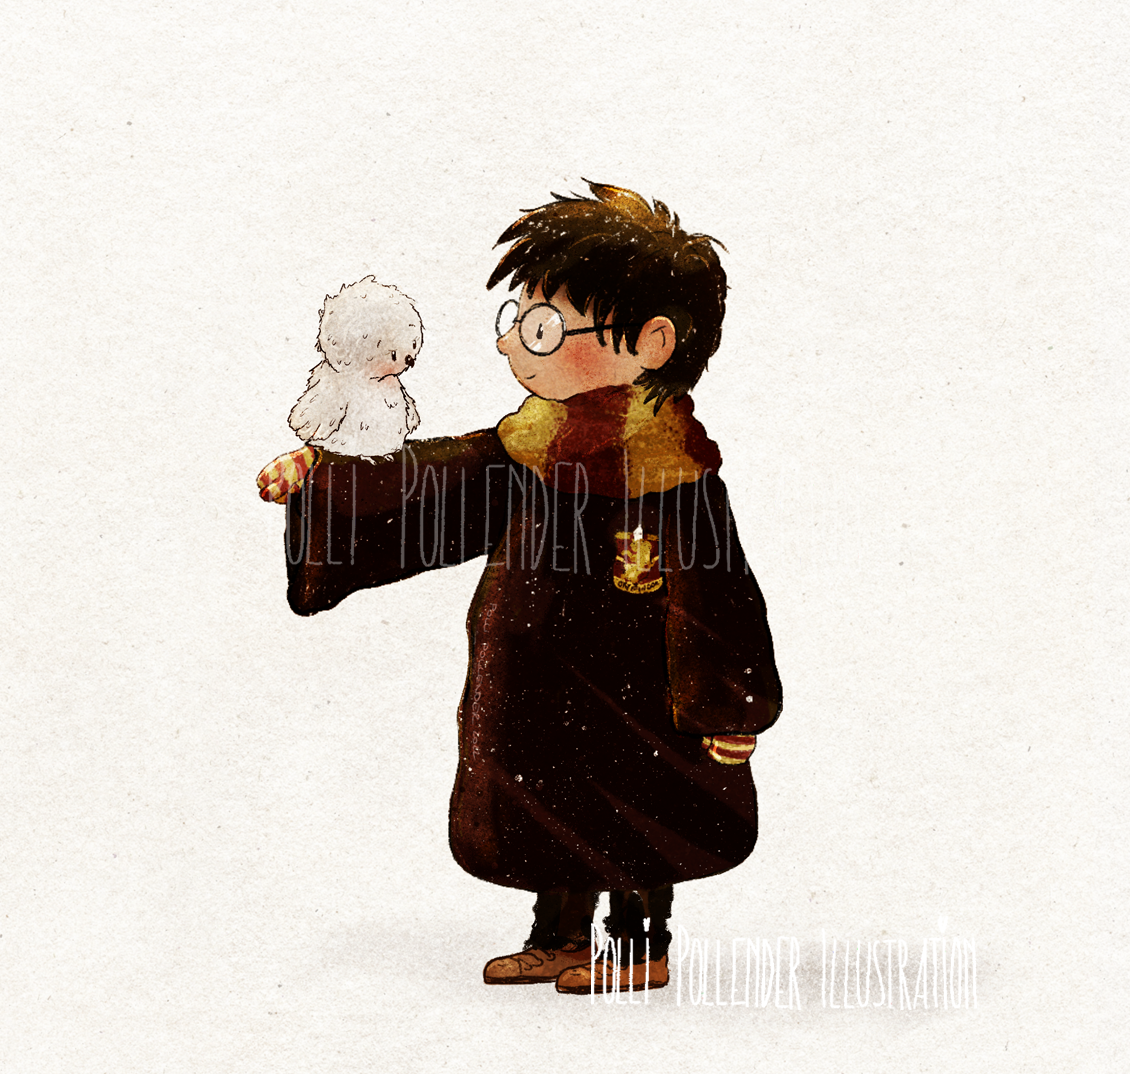 Harry - Harry Potter Series - by Polli Pollender